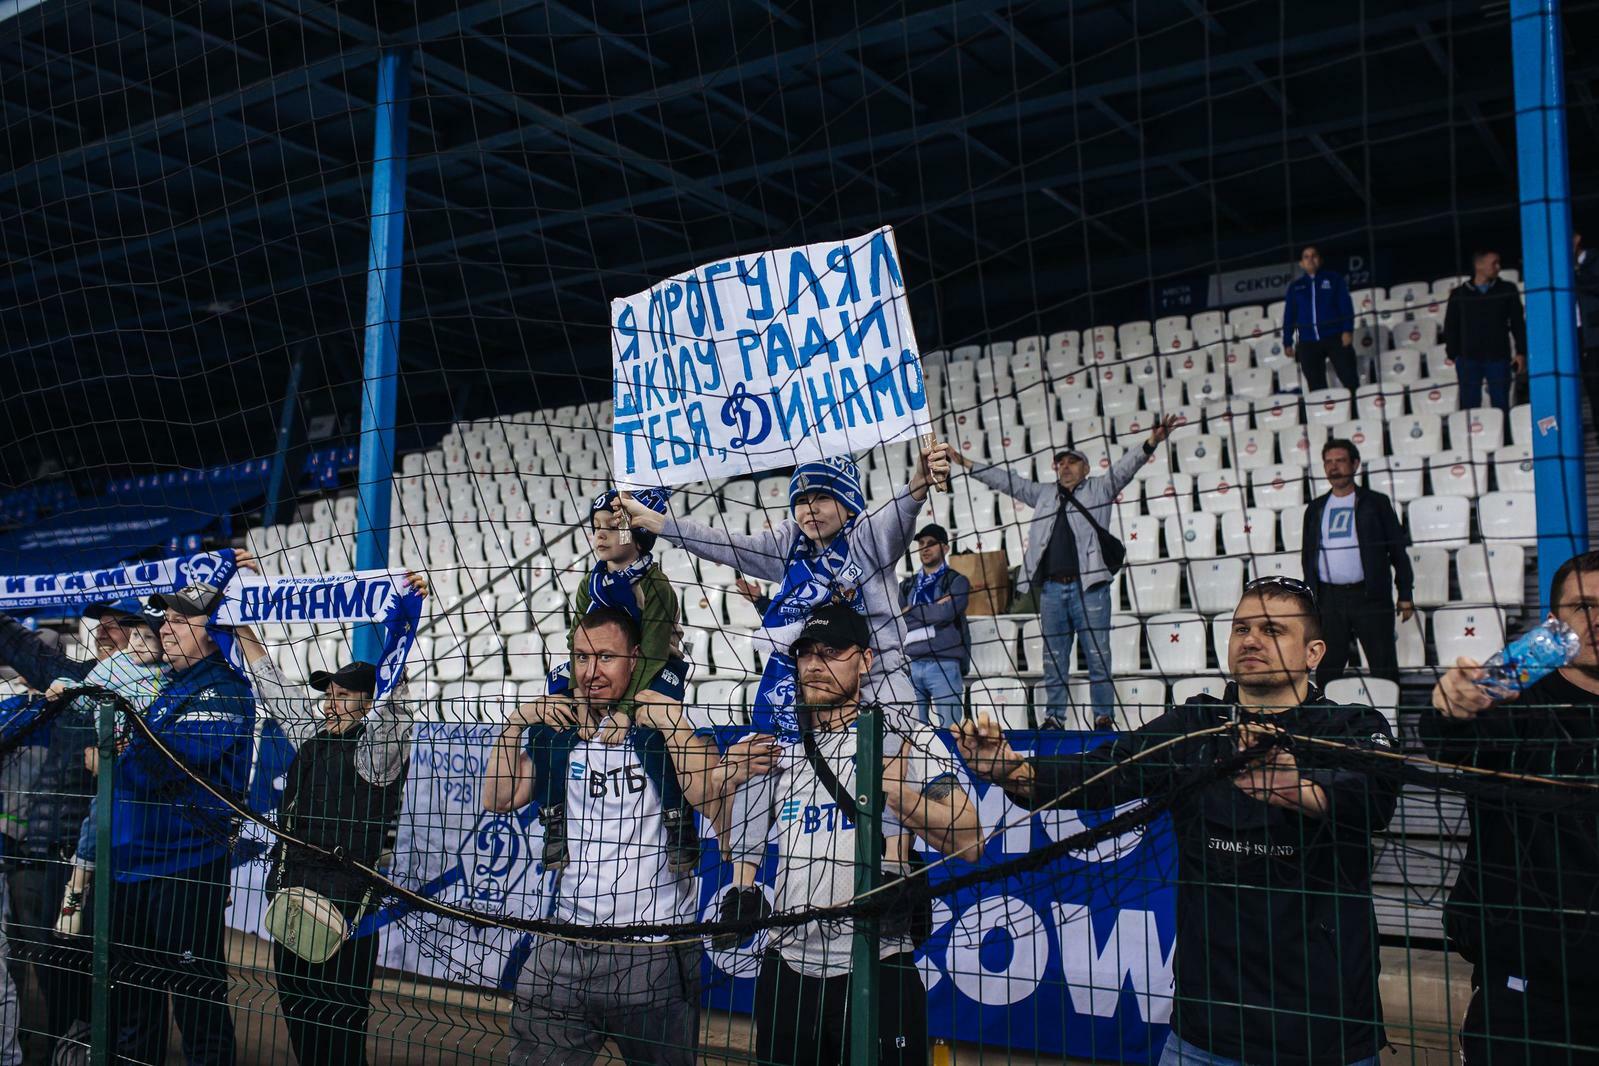 FC Dynamo Moscow News | Information for fans traveling to support the team in Orenburg. Official Dynamo club website.